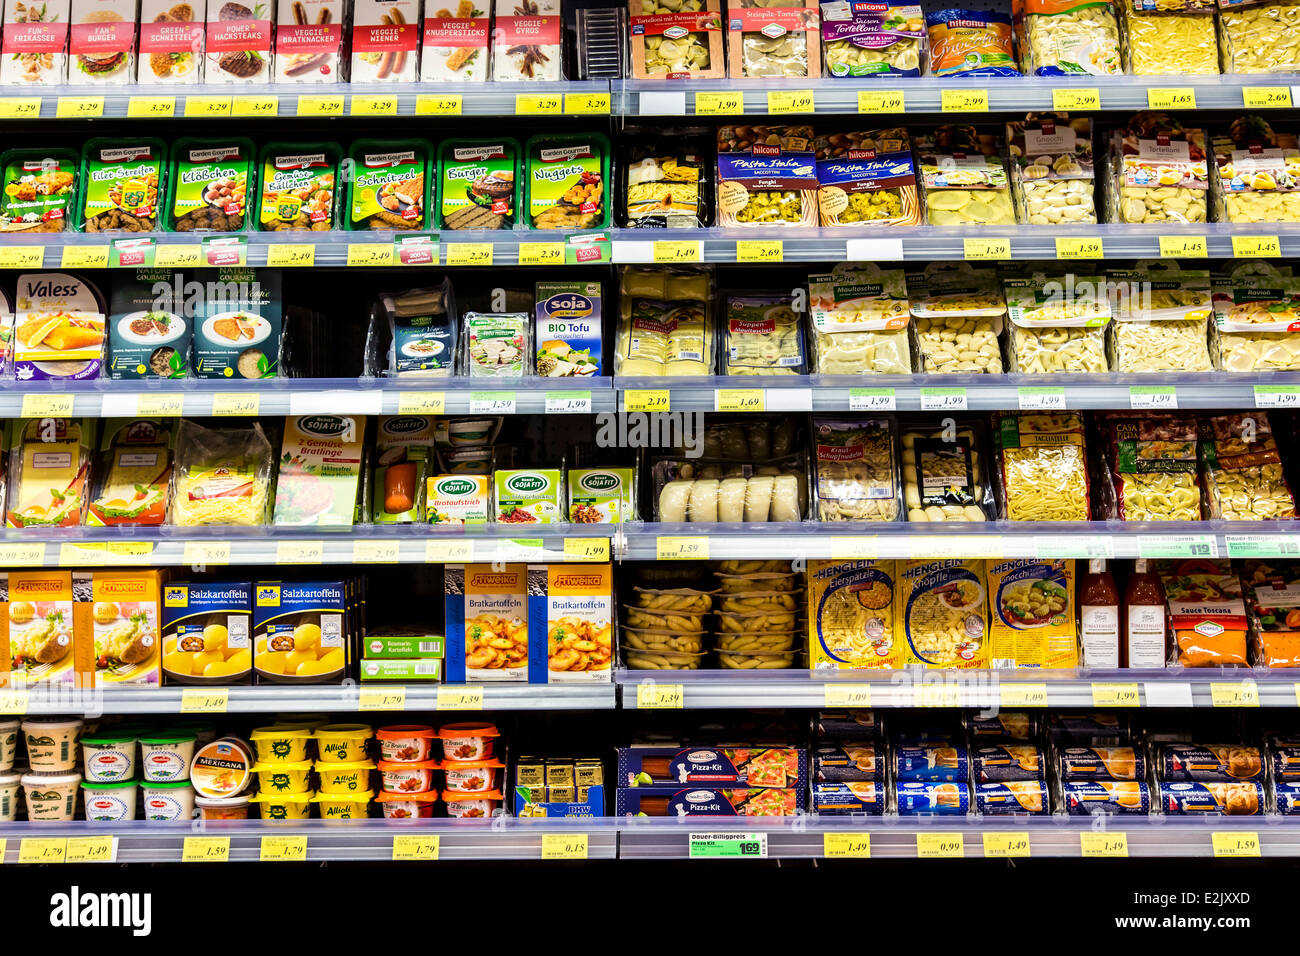 Shelf with food in a supermarket. Refrigerated, ready to eat meals, Pasta products, Stock Photo